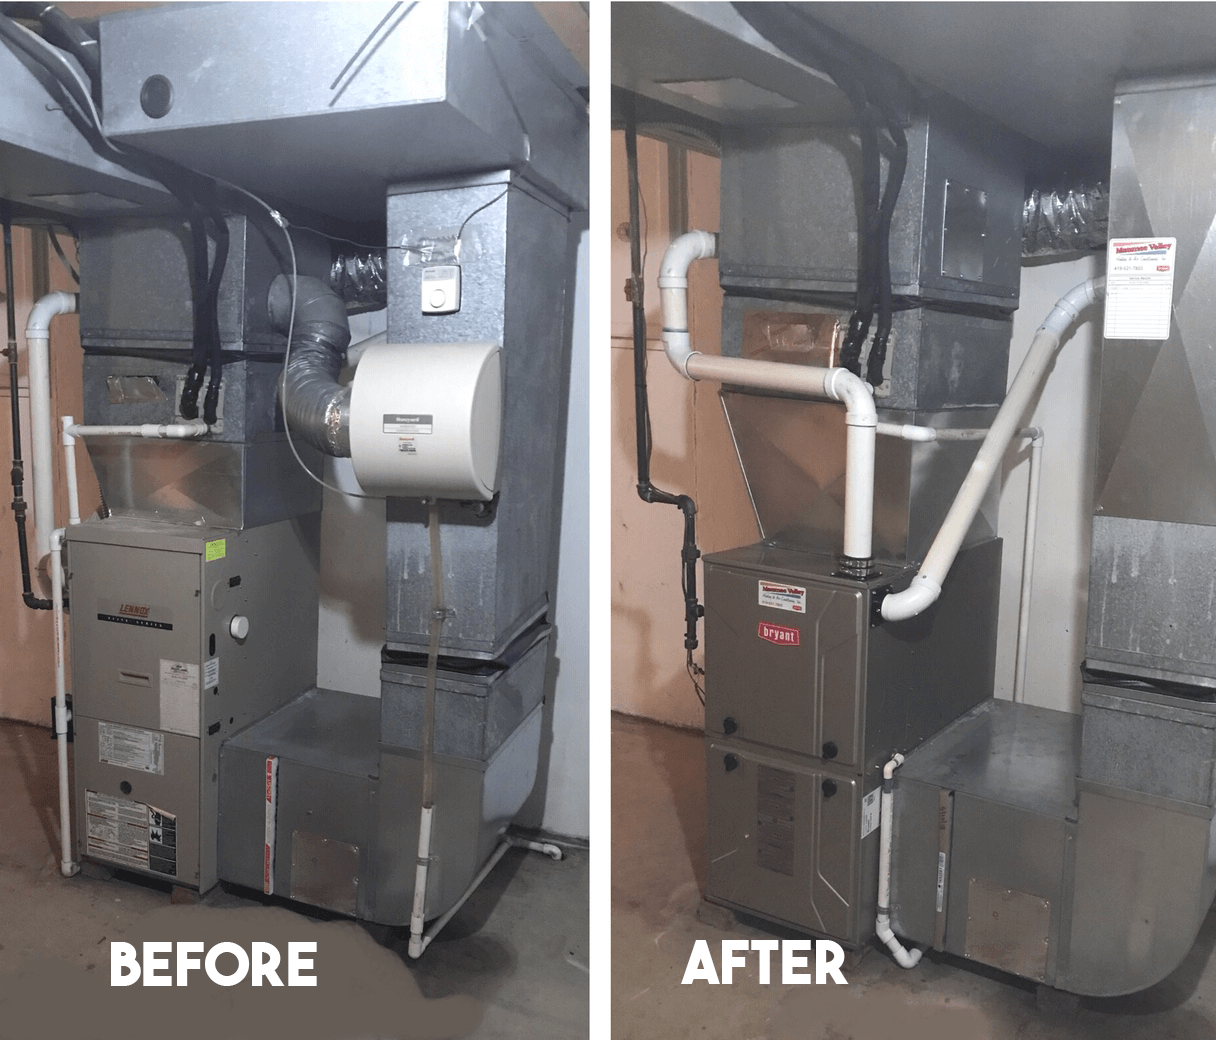 Gas furnace replace, before and after replacing a furnace in Toledo area home by Maumee Valley Heating & Air Conditioning. 